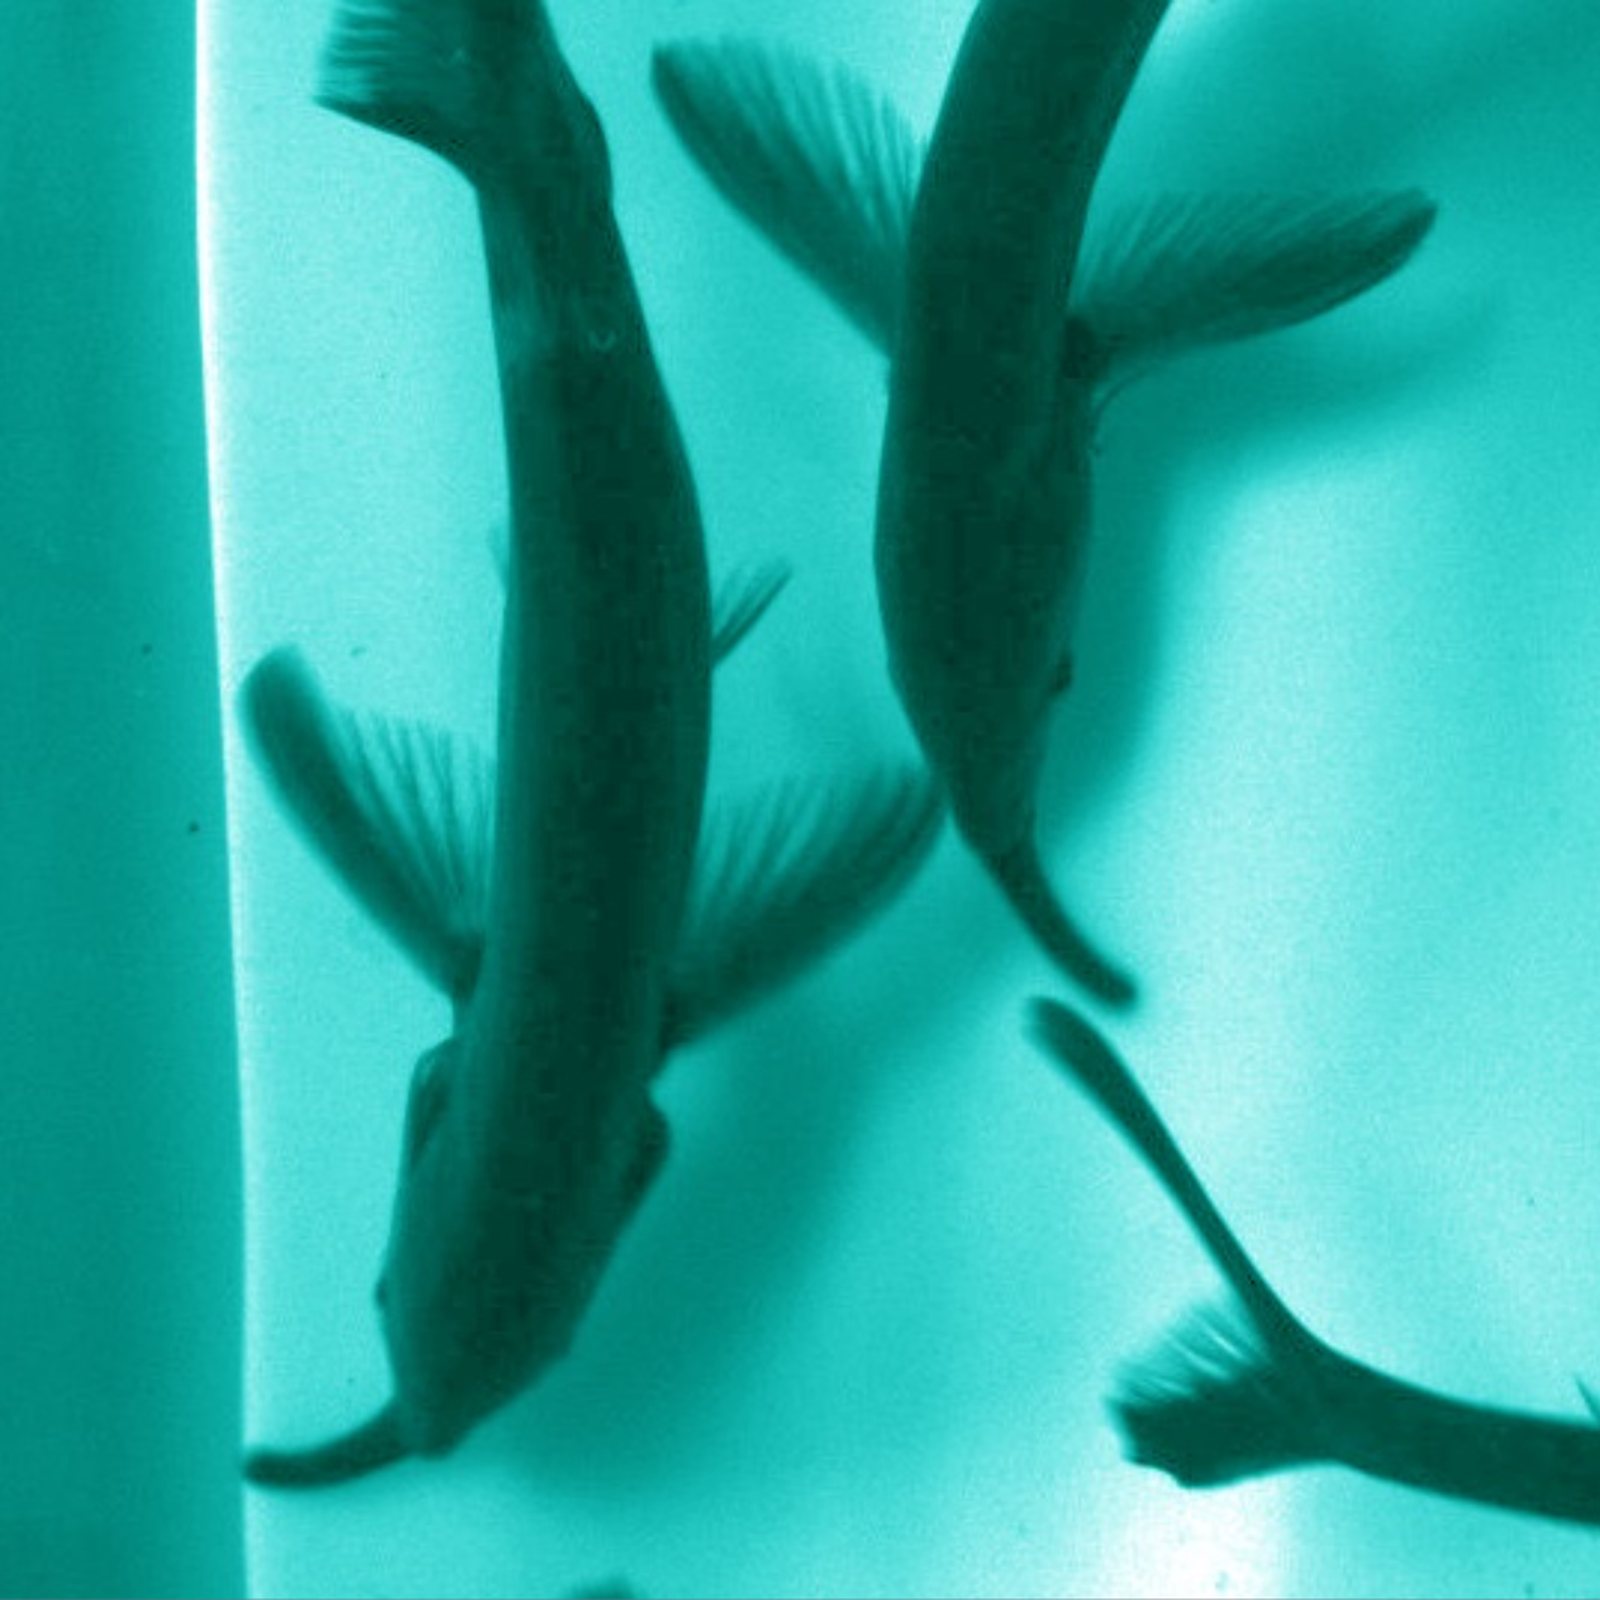 Electric fish exploit signals from their peers to hunt